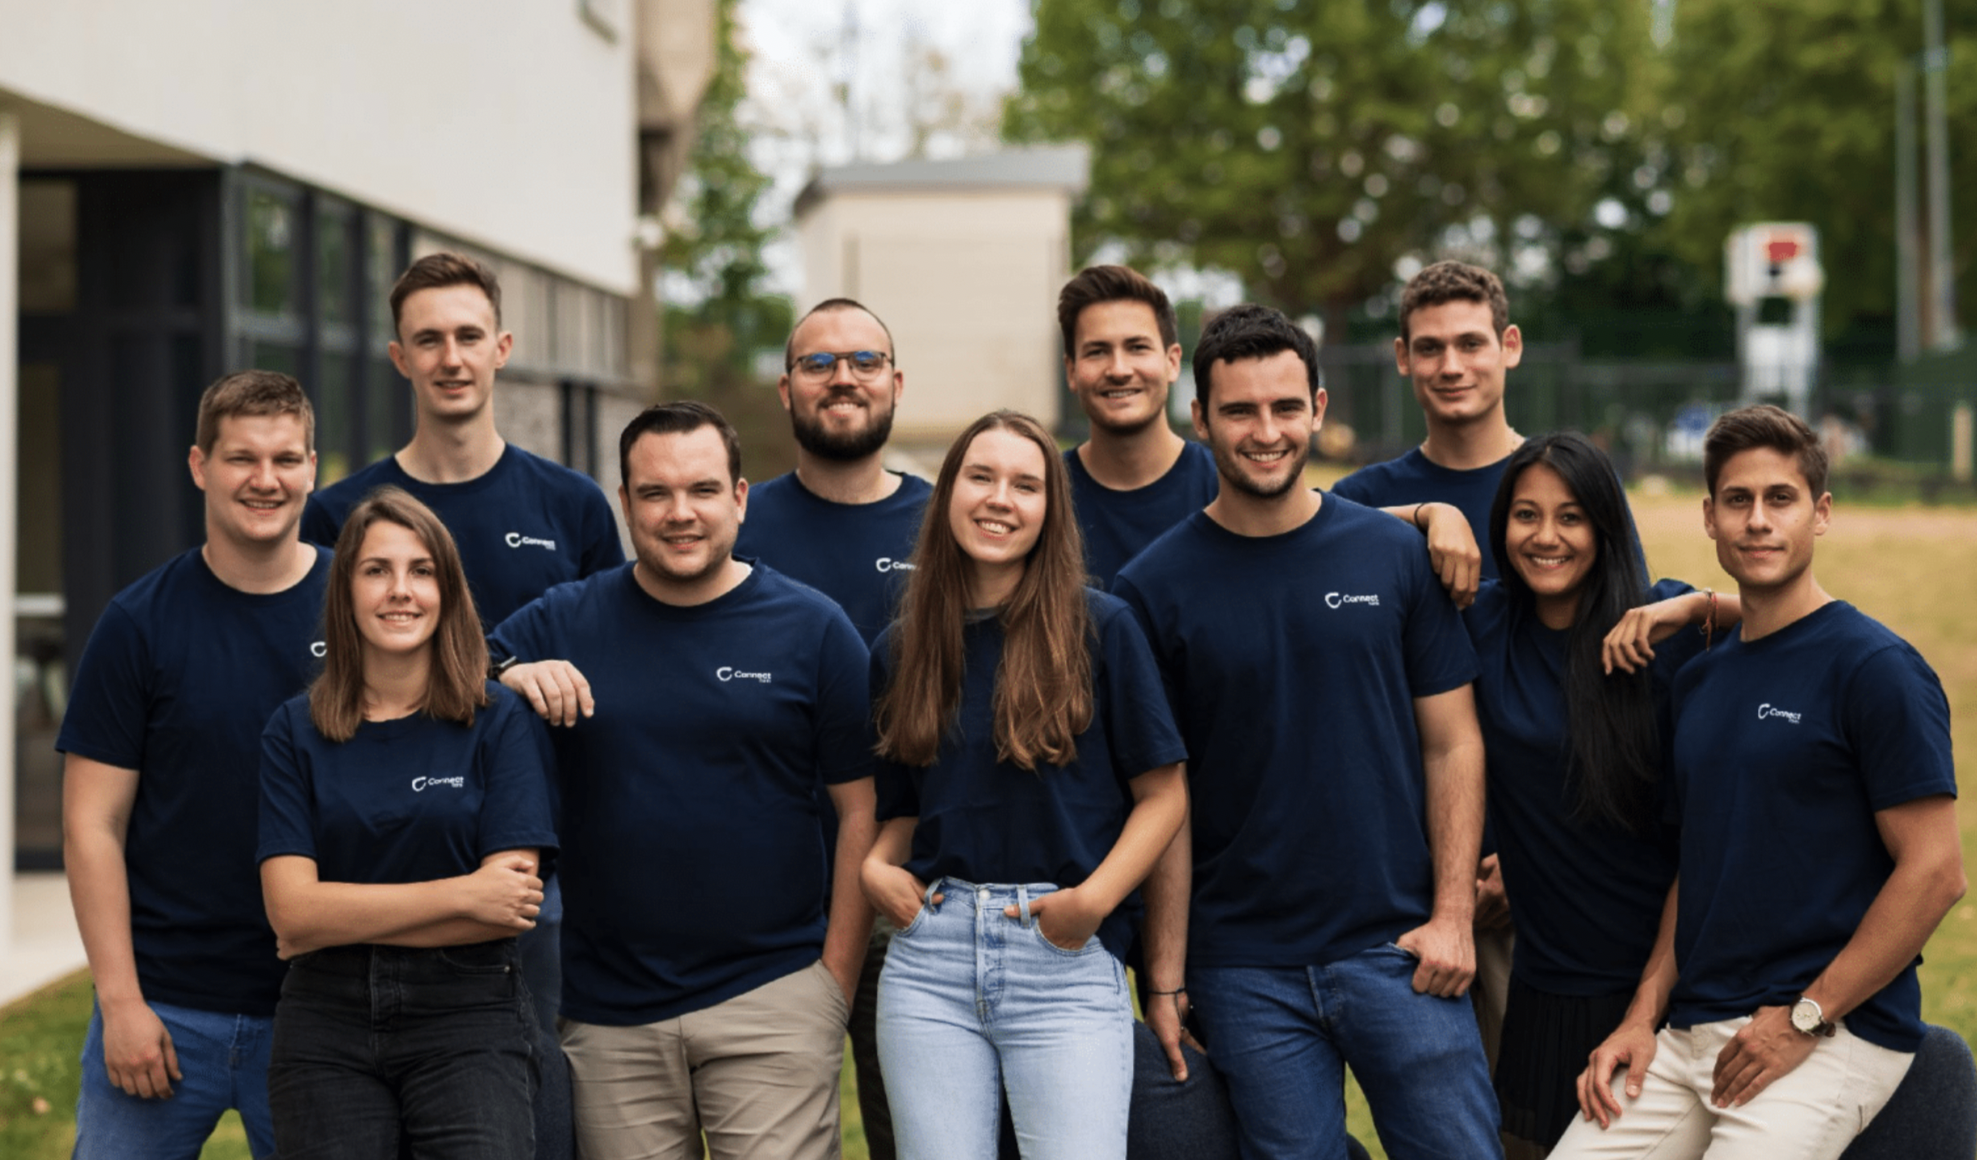 Connect Earth Founding team